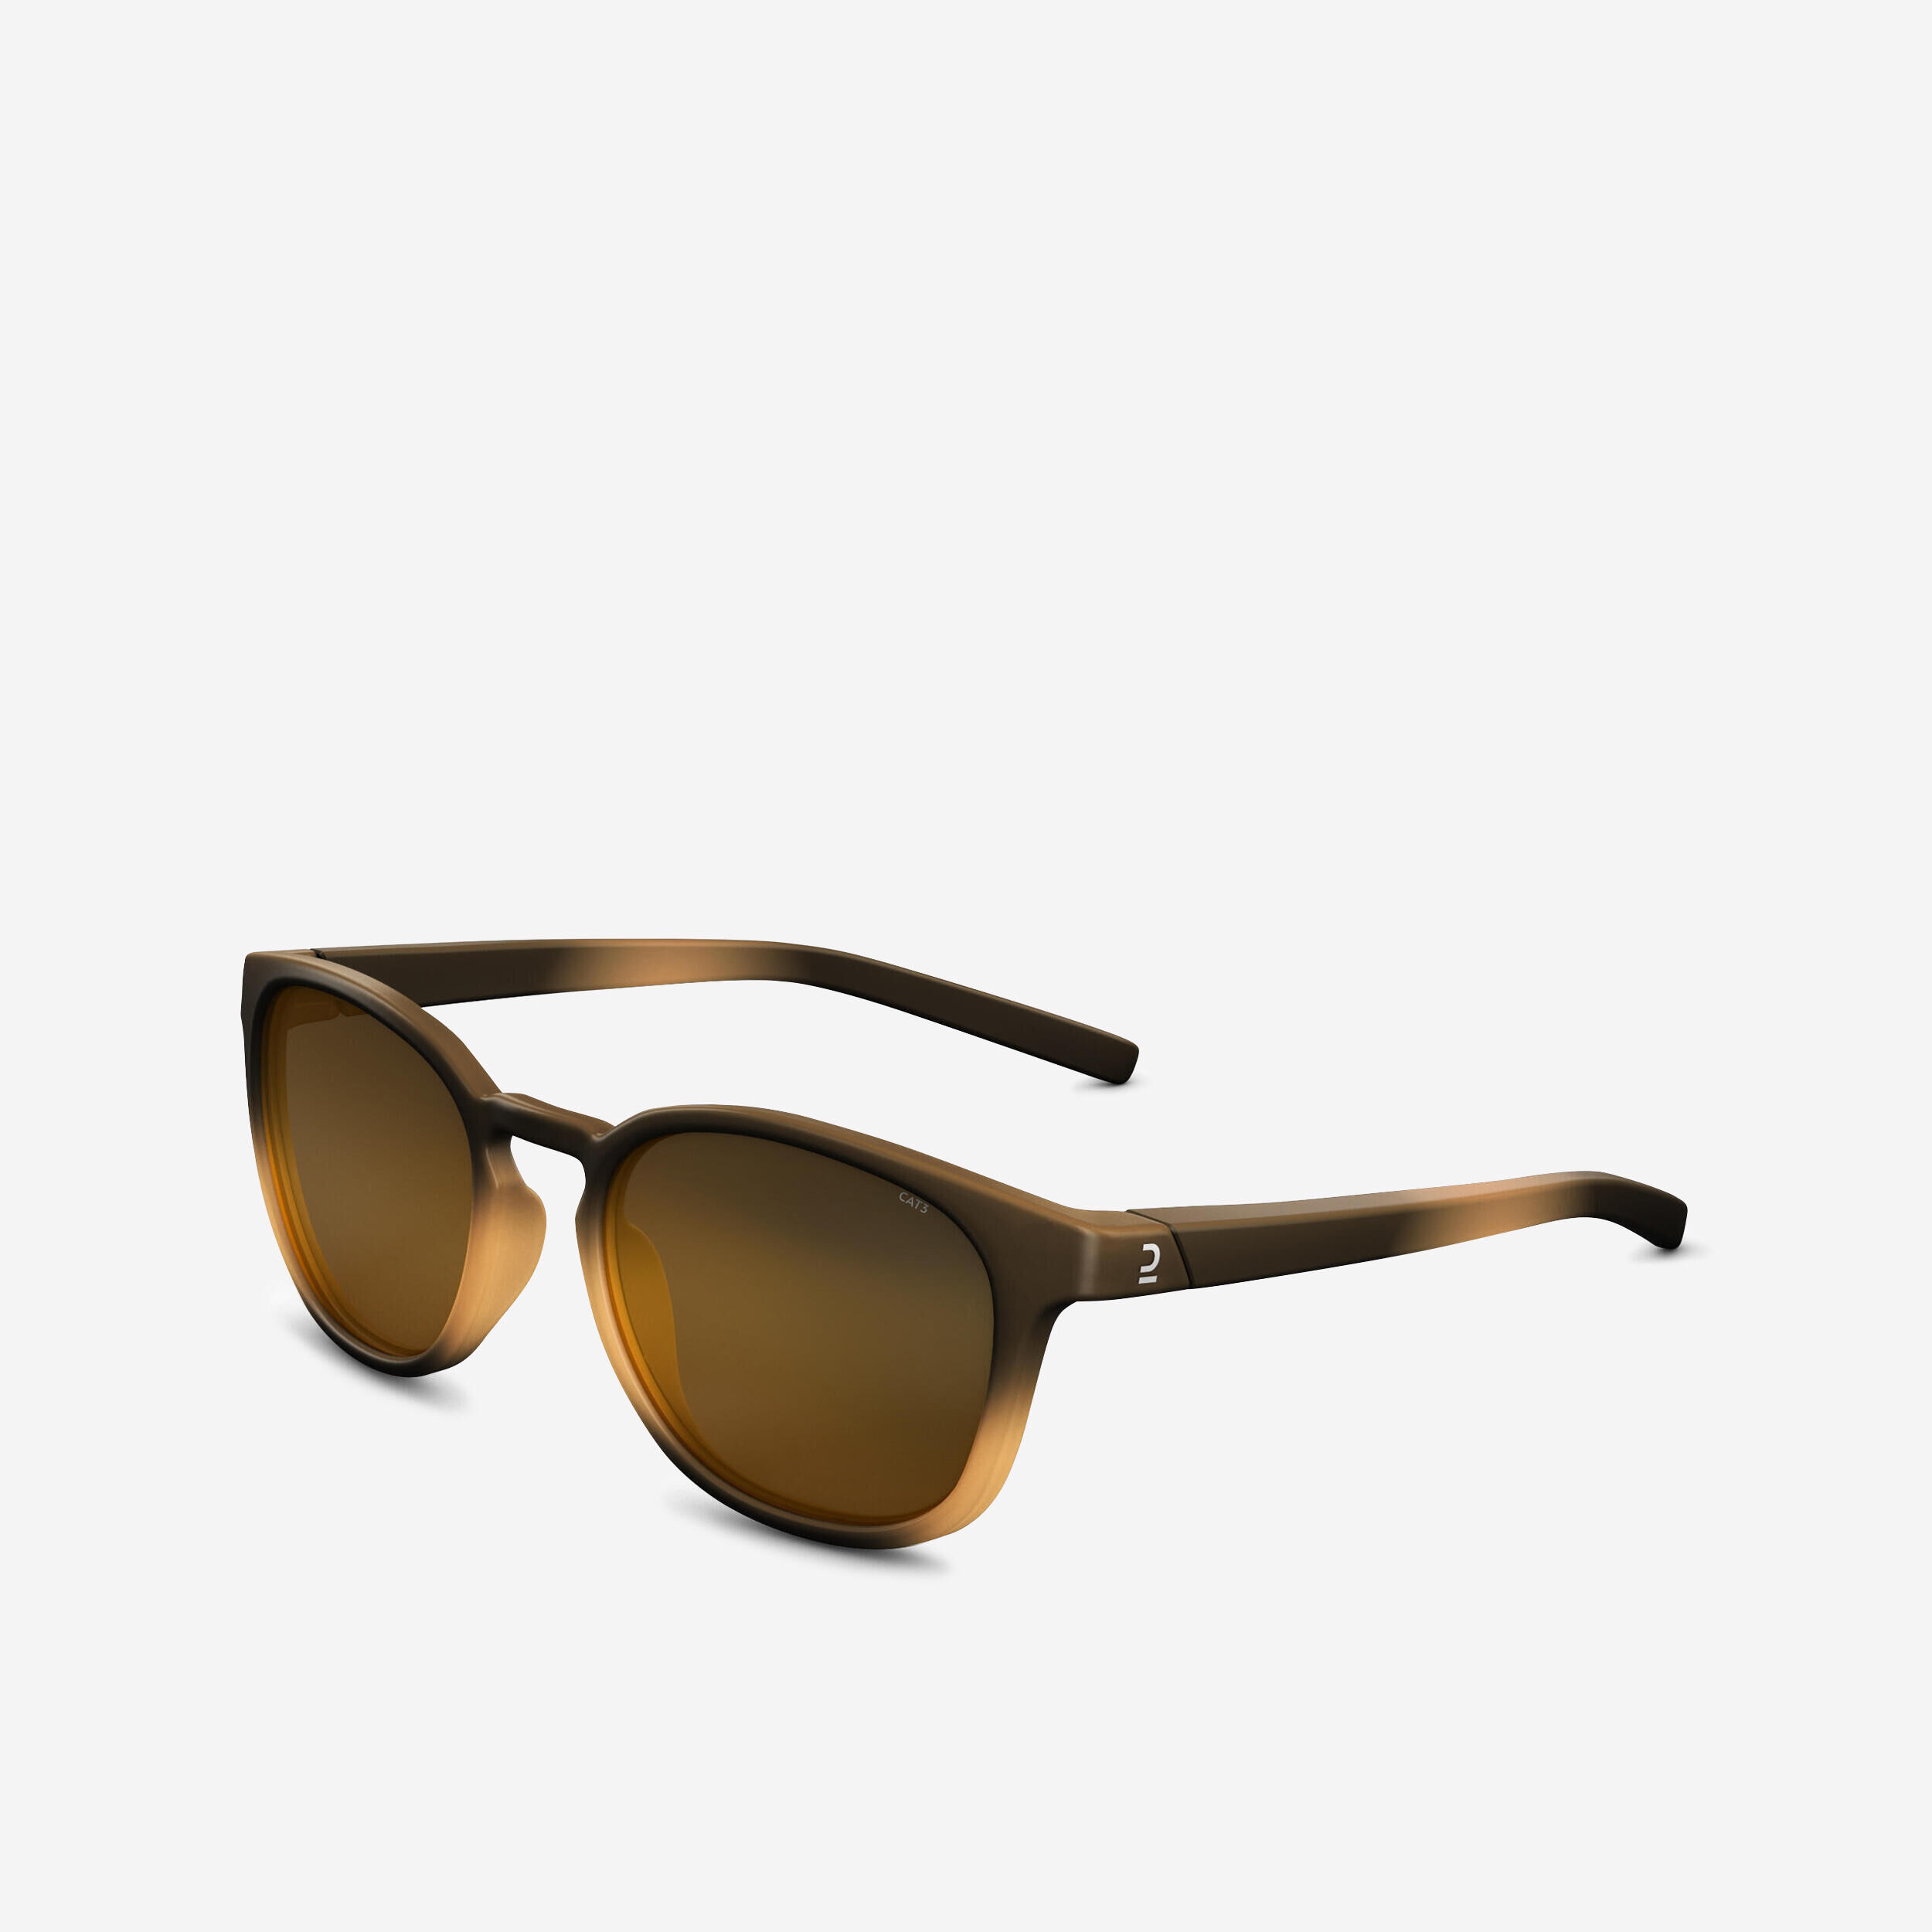 QUECHUA Adult - Hiking Sunglasses - MH160 - Category 3